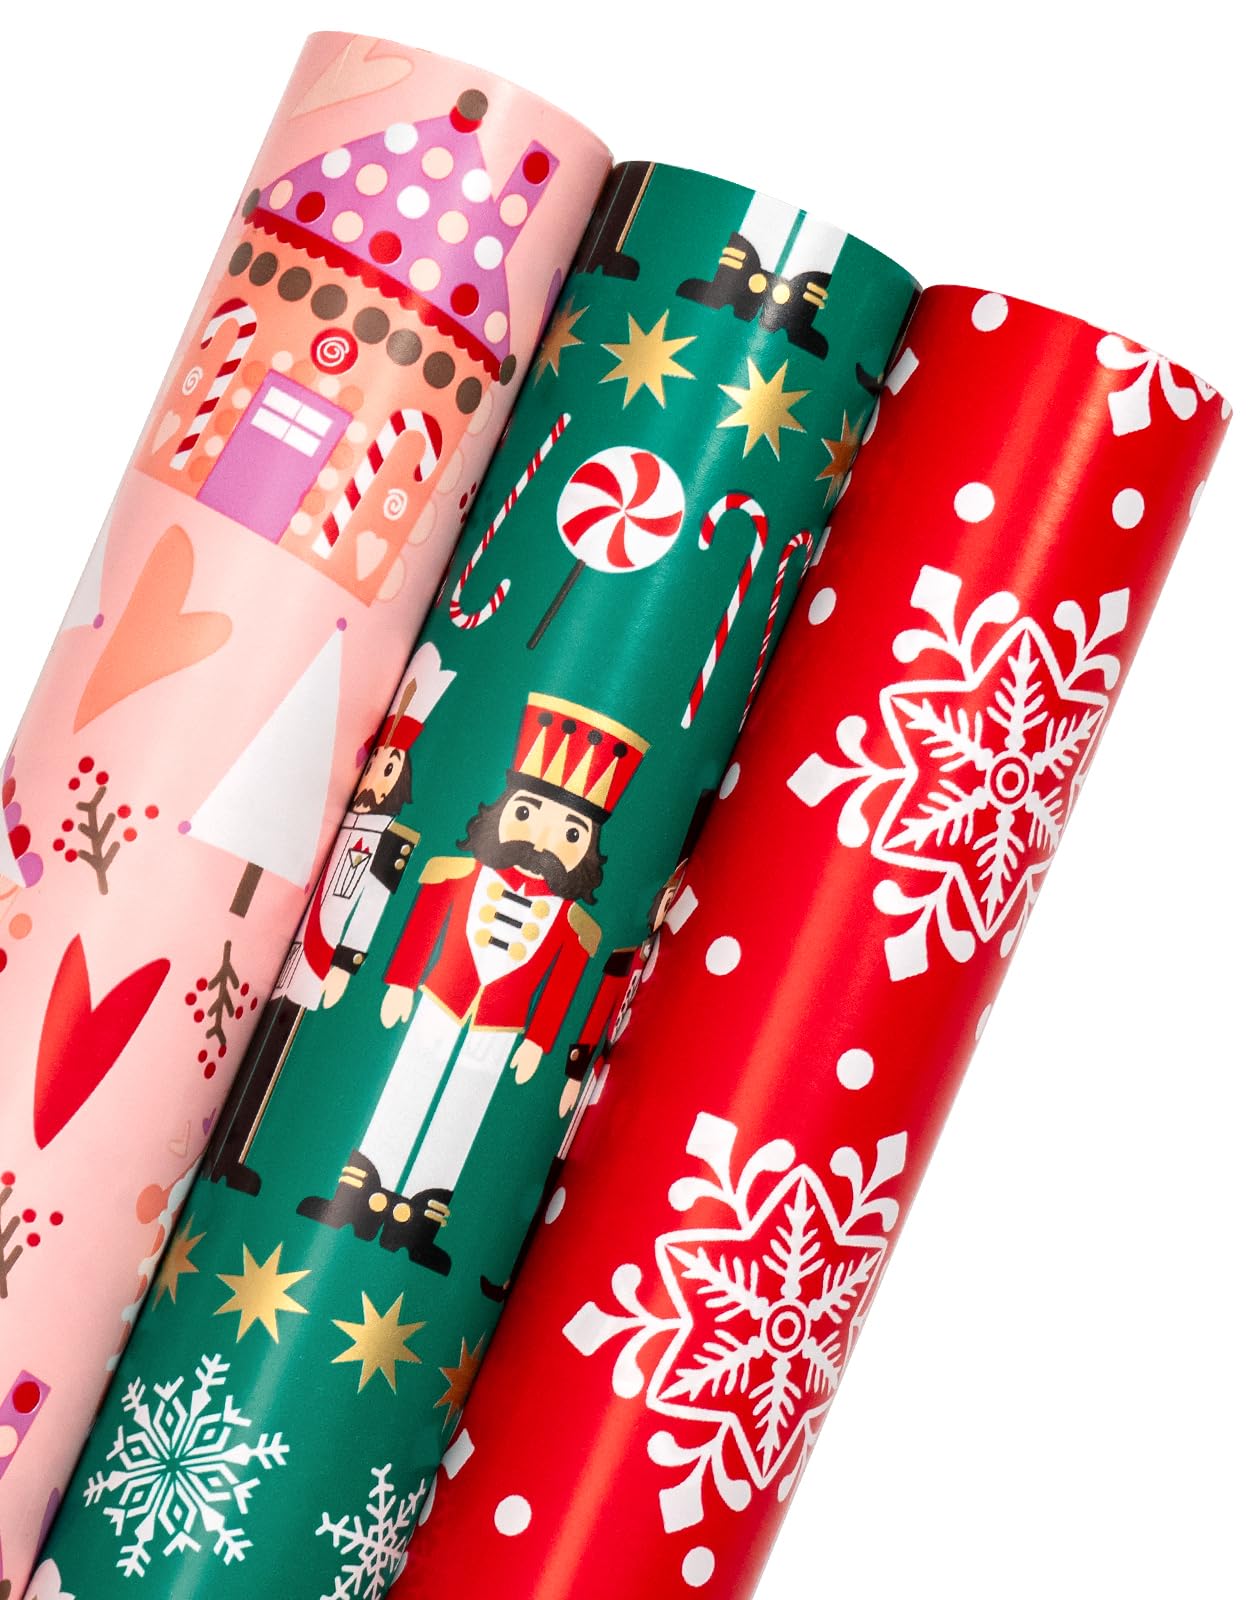 WRAPAHOLIC Christmas Wrapping Paper Roll - Mini Roll - 3 Rolls - 17 Inch X 120 Inch Per Roll - Nutcracker, House, Snowflake Holiday Collection